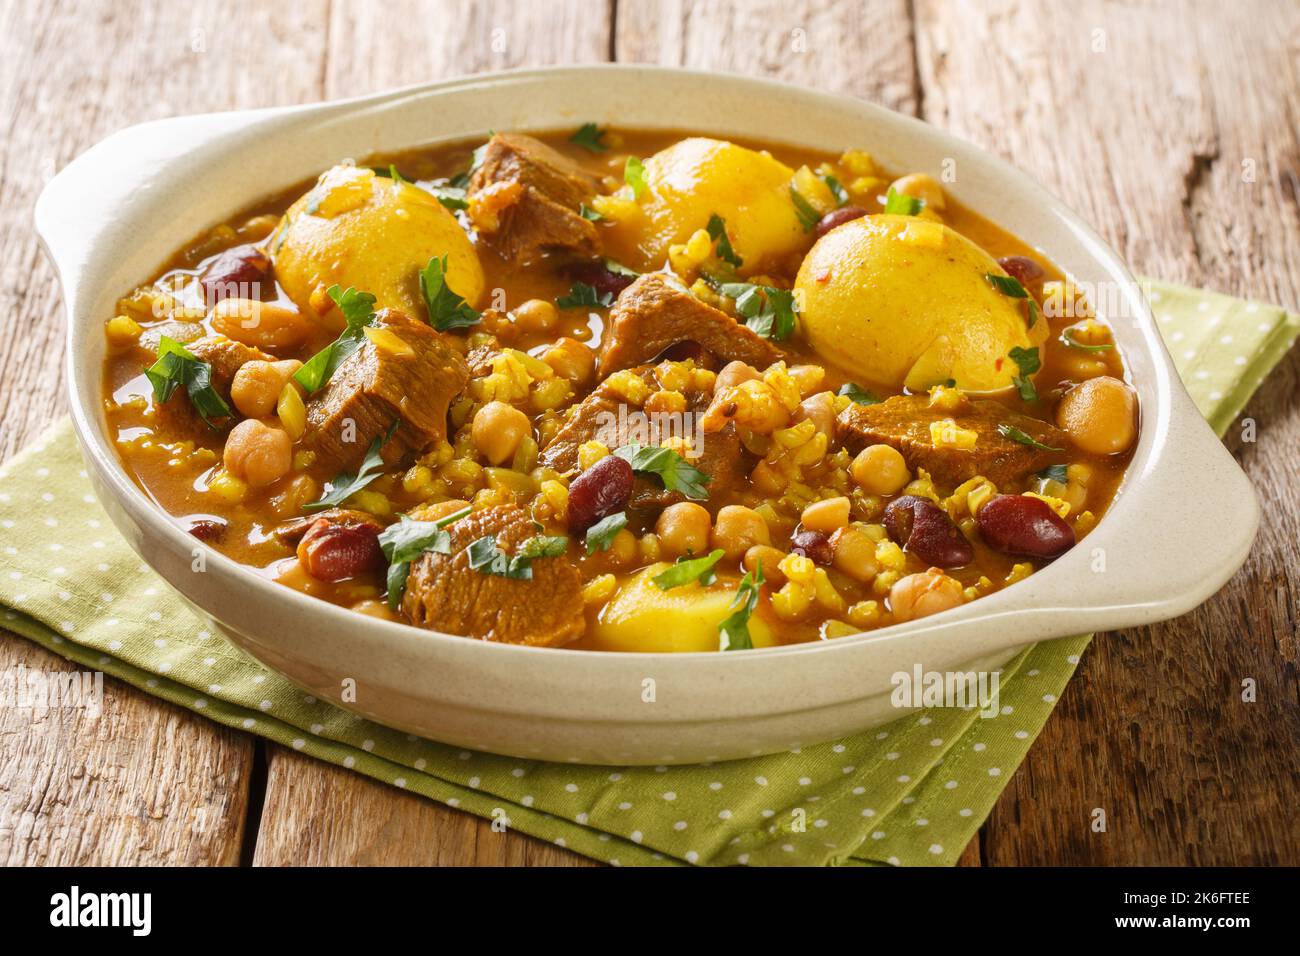 https://c8.alamy.com/comp/2K6FTEE/traditional-jewish-stew-cholent-hamin-on-sabbath-day-closeup-in-the-pan-on-the-table-horizontal-2K6FTEE.jpg